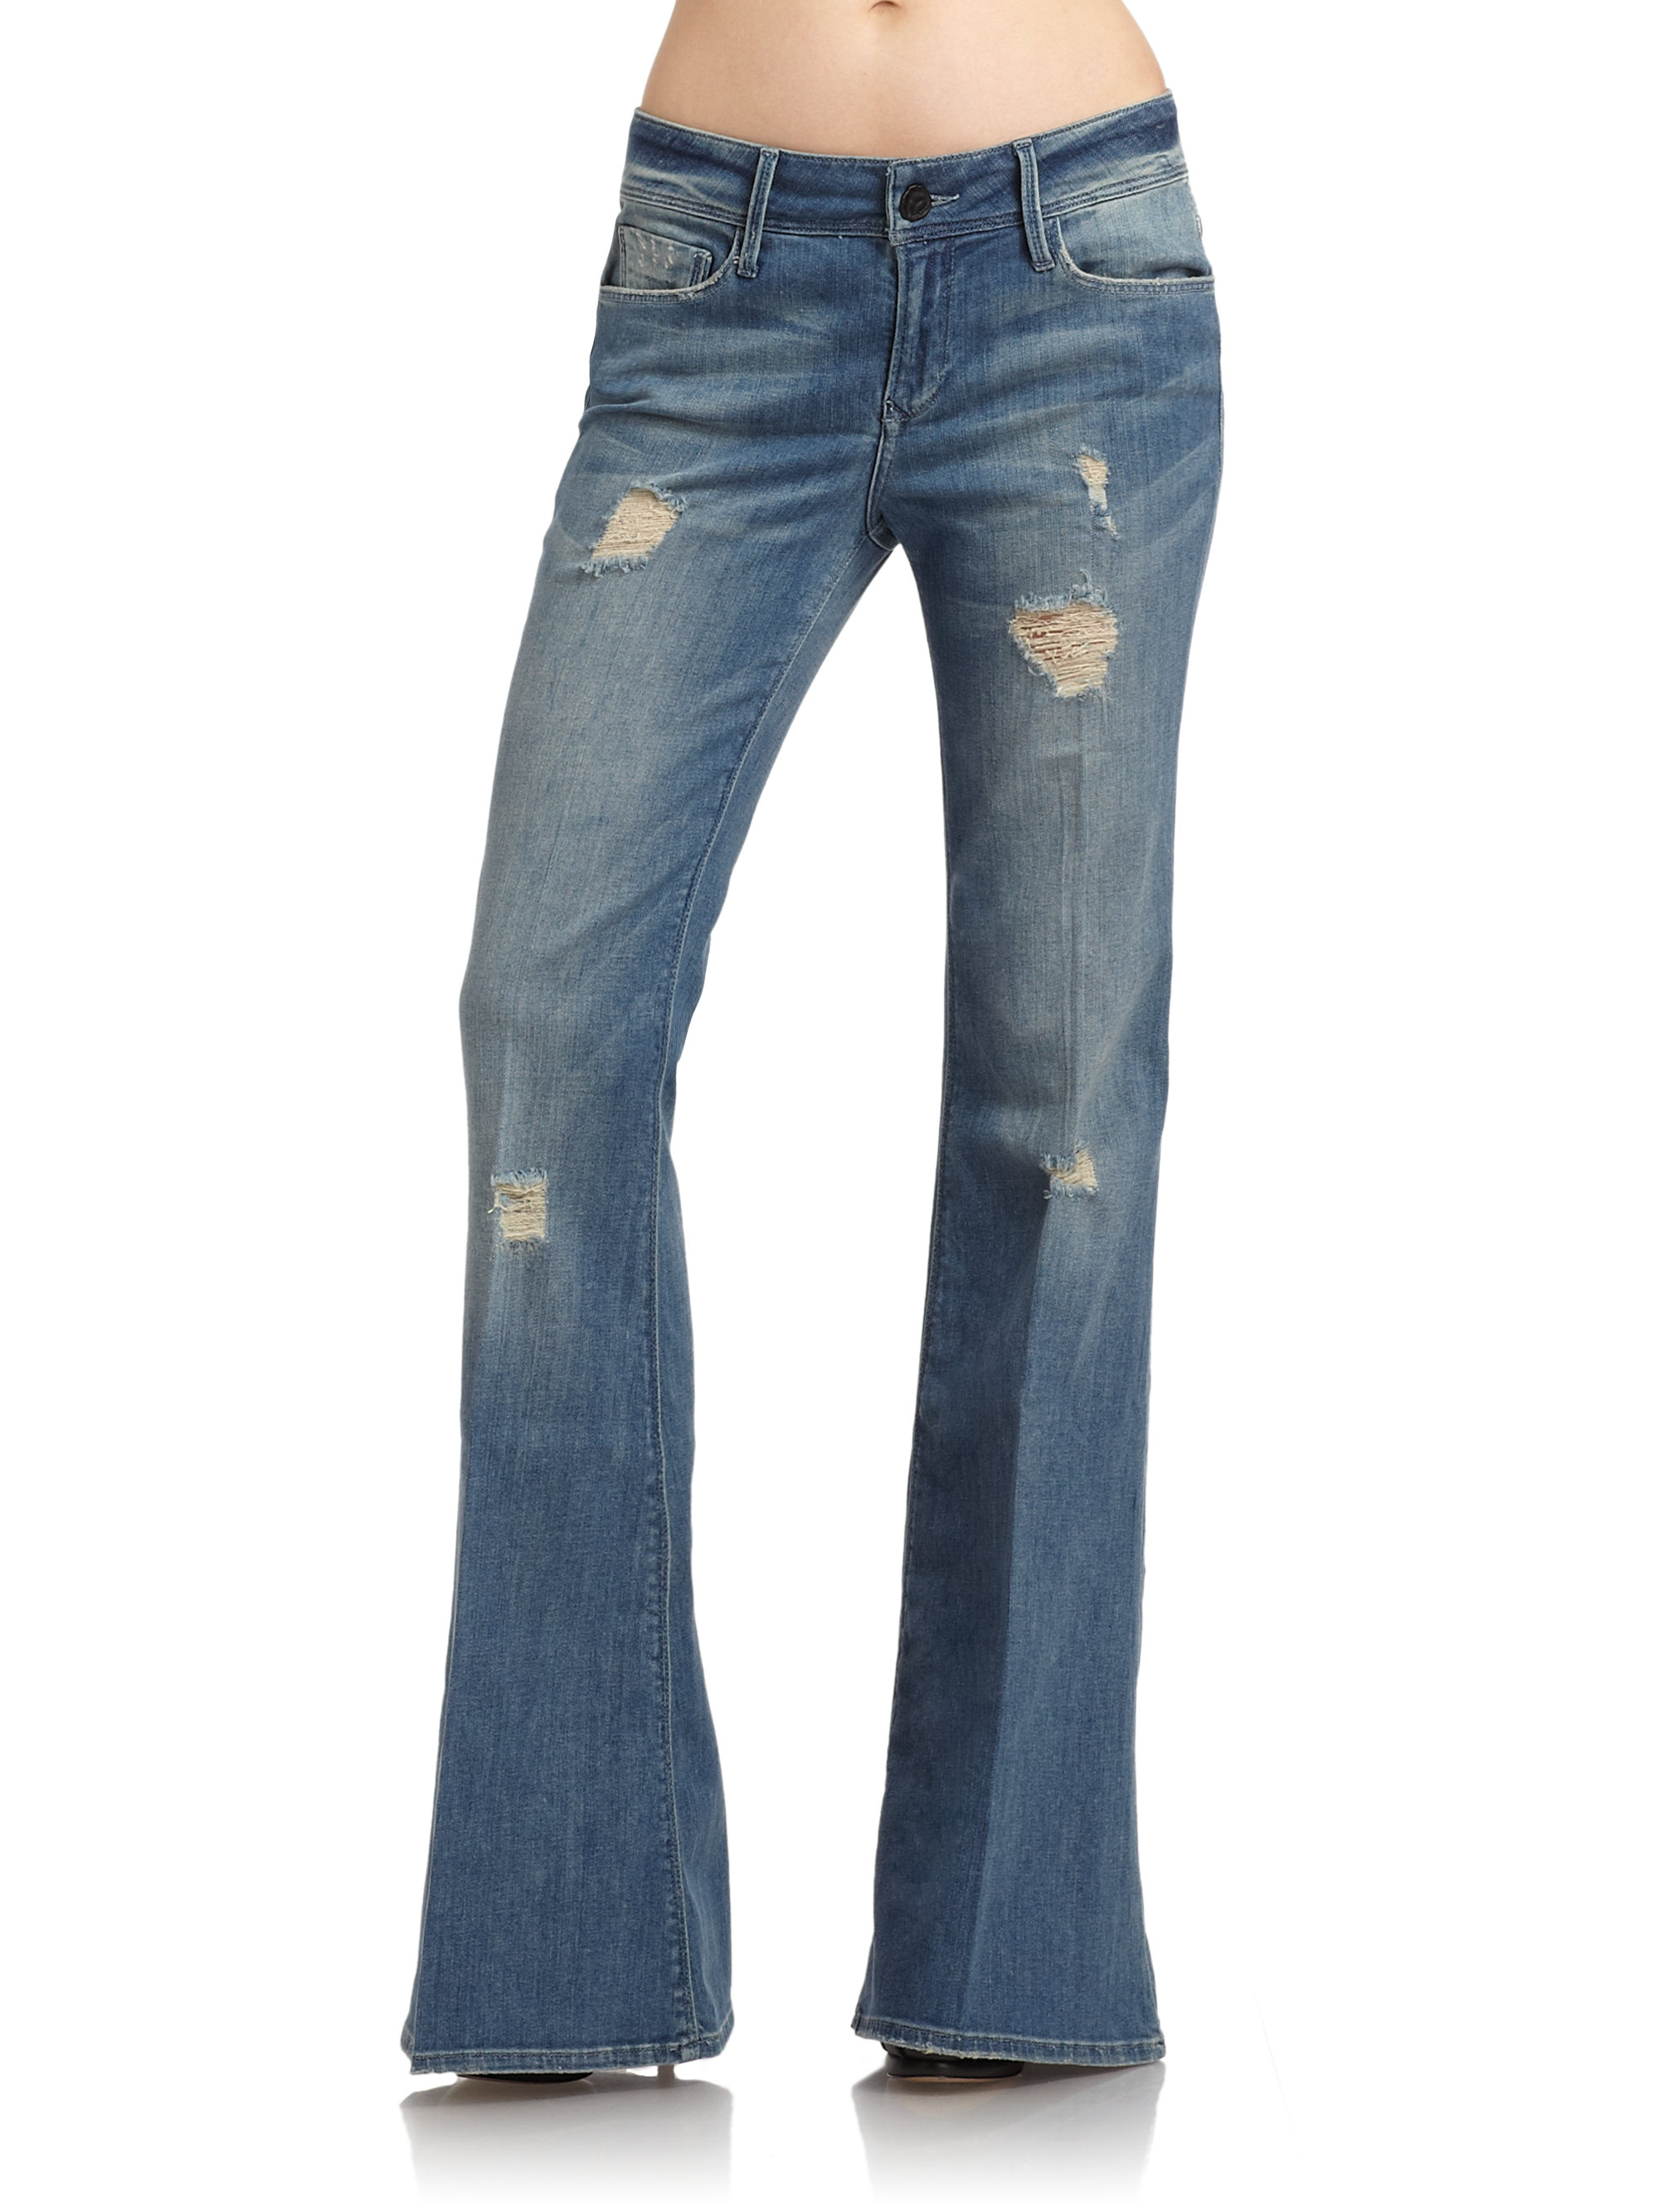 Lyst - Black Orchid Distressed Bell Bottom Jeans in Blue